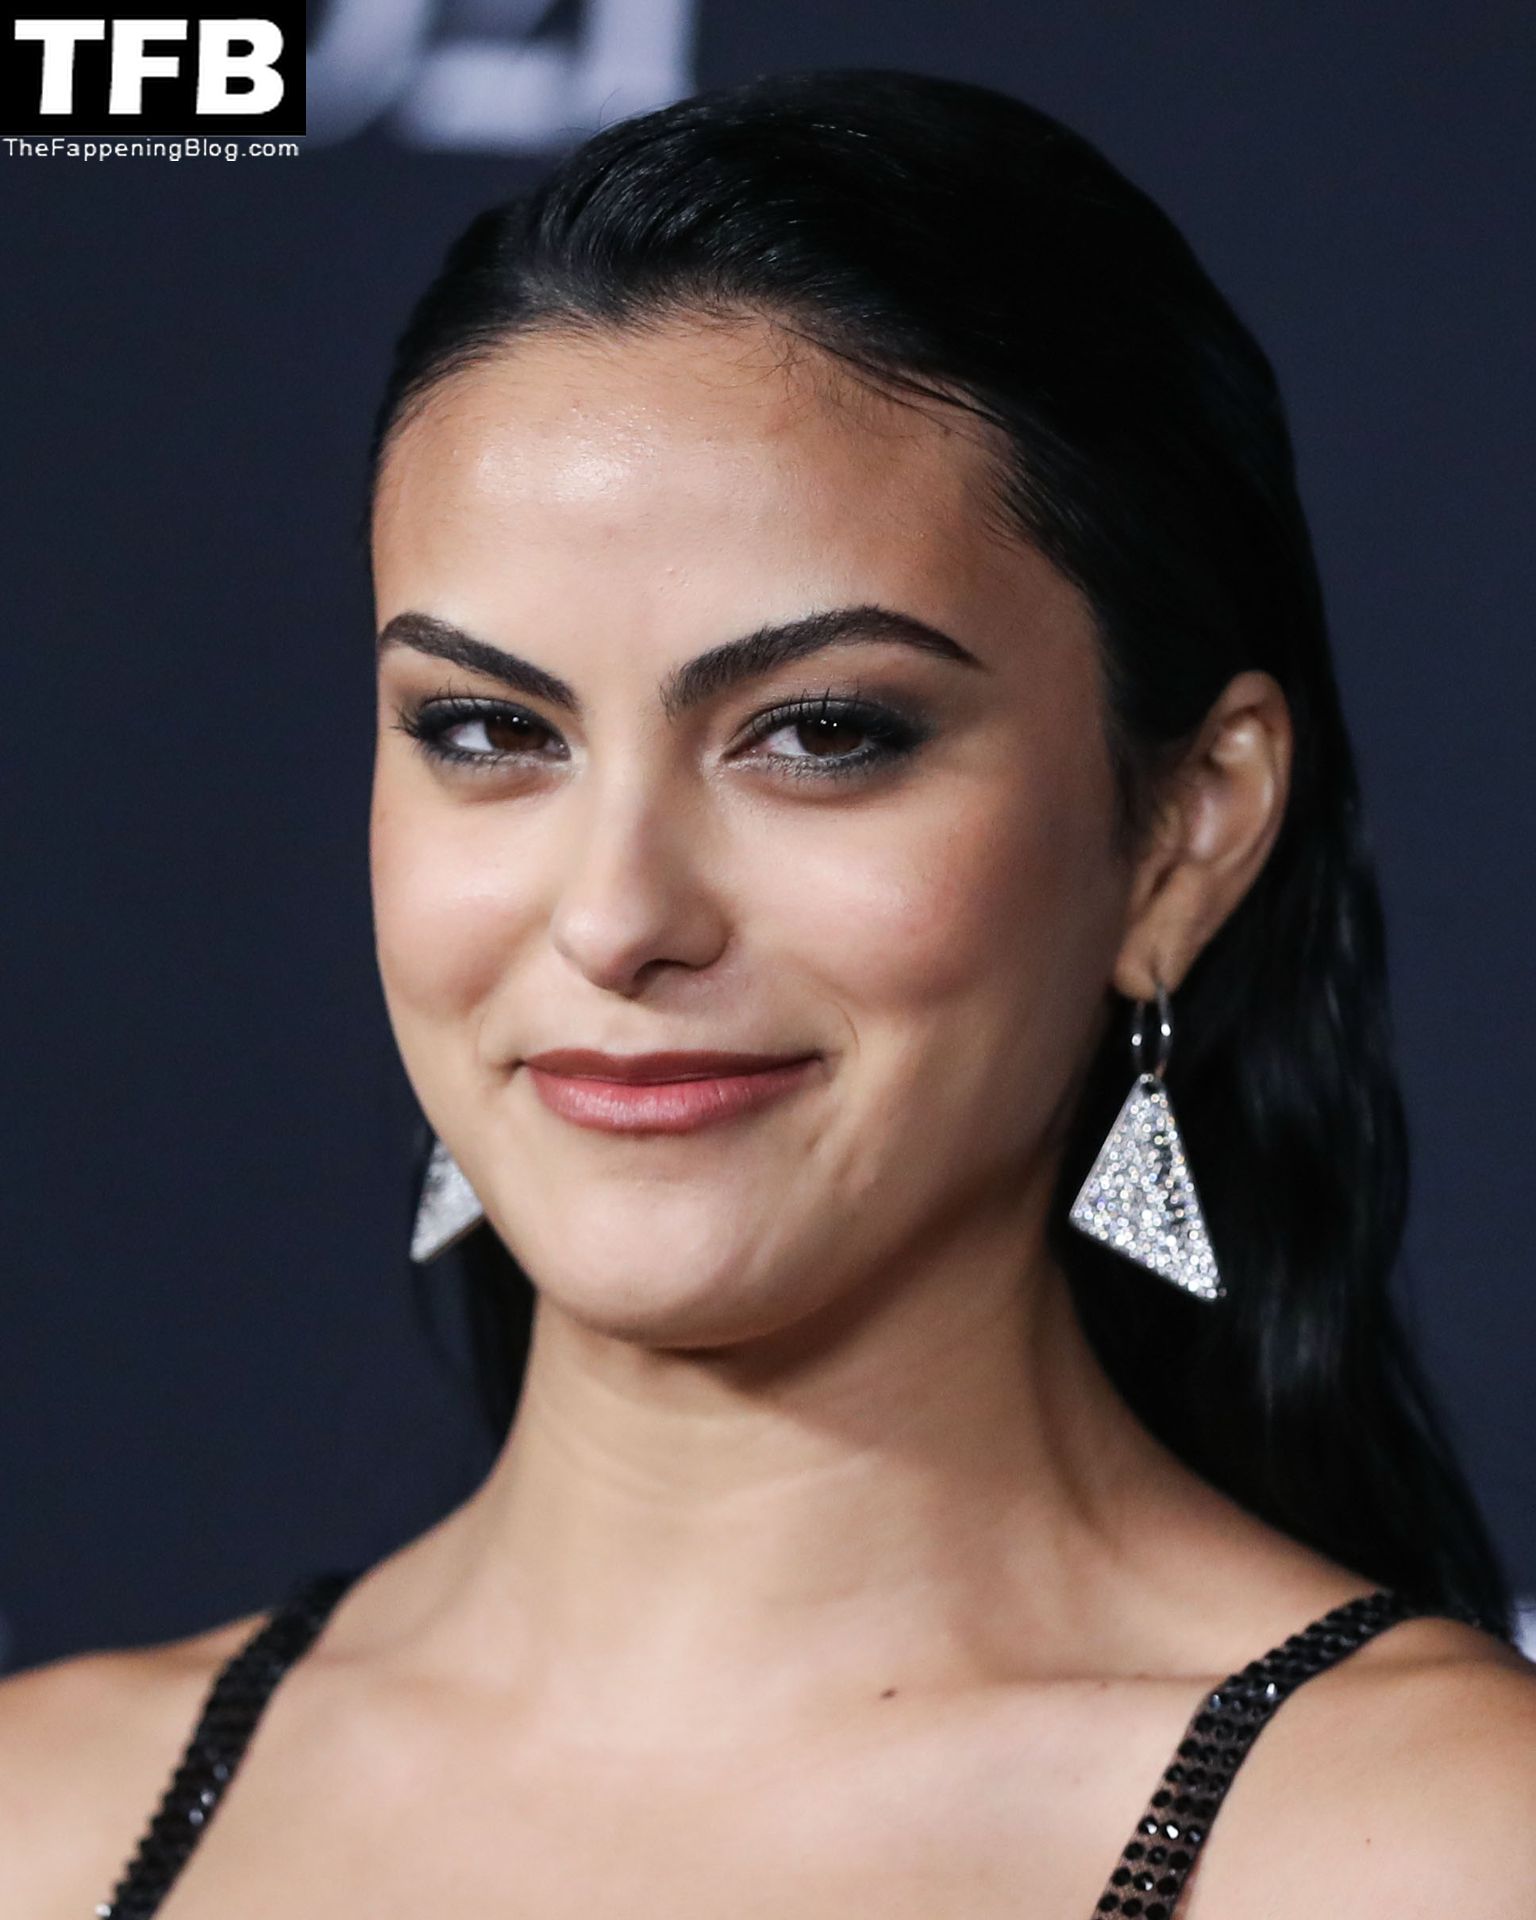 Camila-Mendes-See-Through-Tits-The-Fappening-Blog-6.jpg